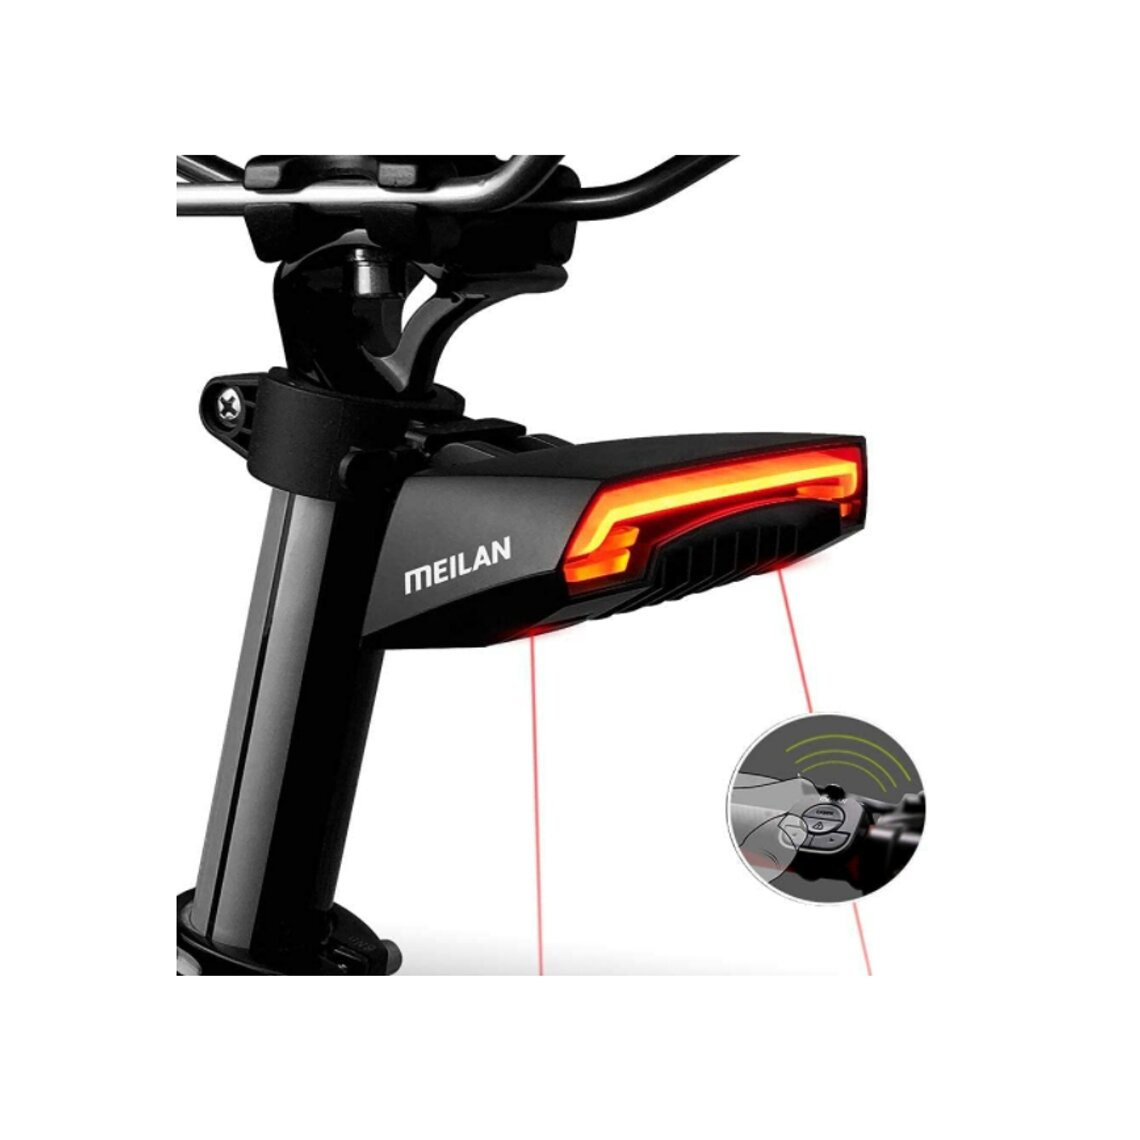 X5 Bike Rear Light with Auto Turn Signals and Brake Light Wireless Remote Control Bike Tail Light Back USB Rechargeable Bicycle Safety Warning Light(B